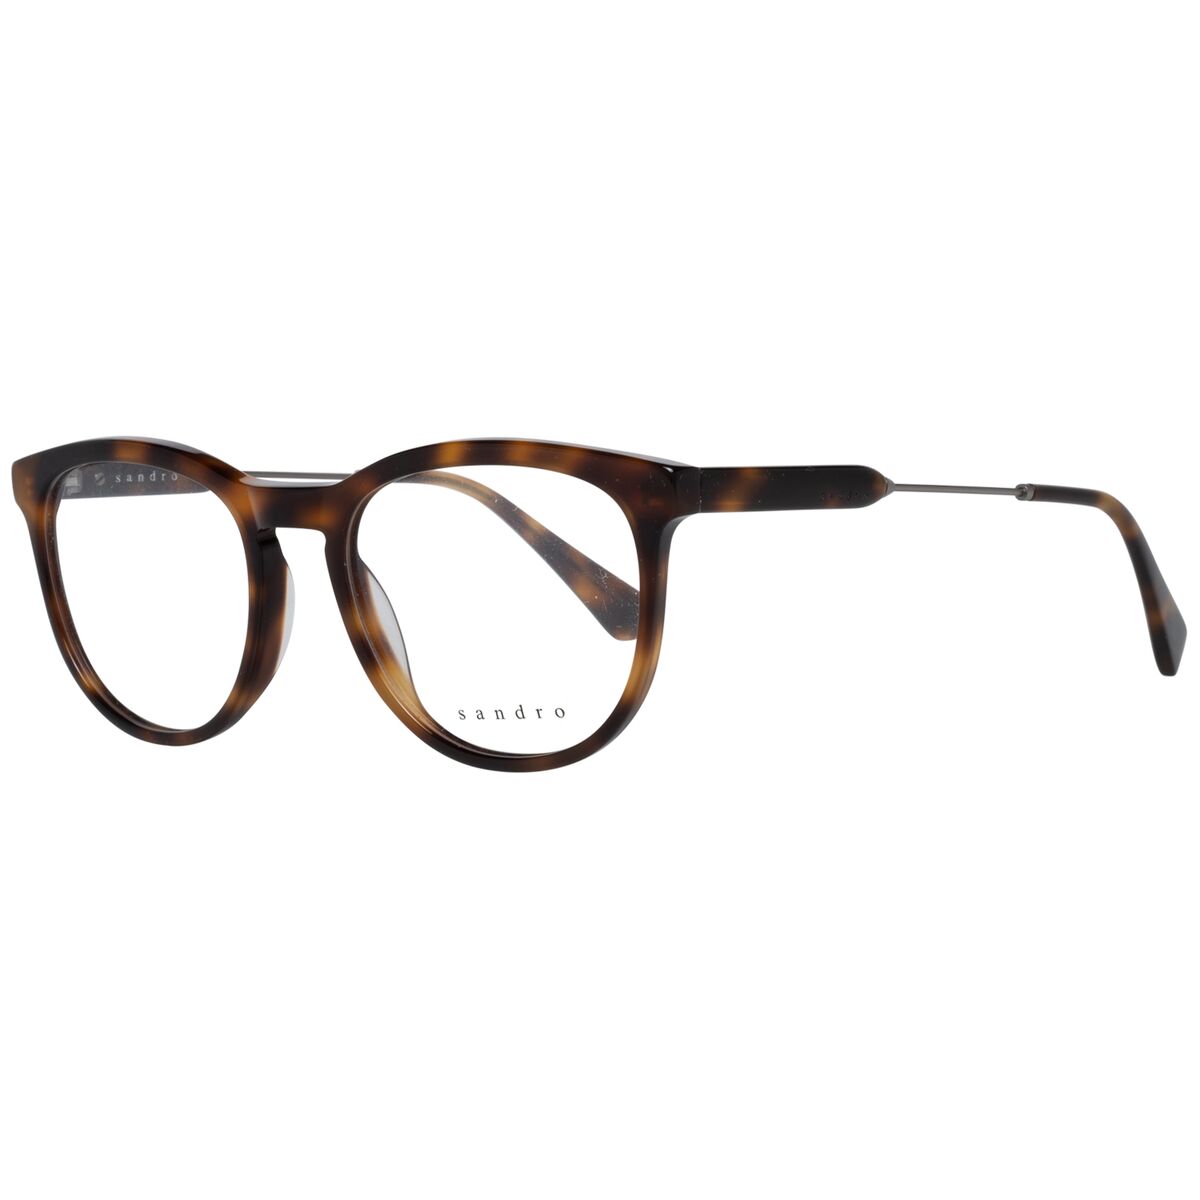 Sandro Men' Spectacle Frame  Paris Sd1012 51201 Gbby2 In Brown